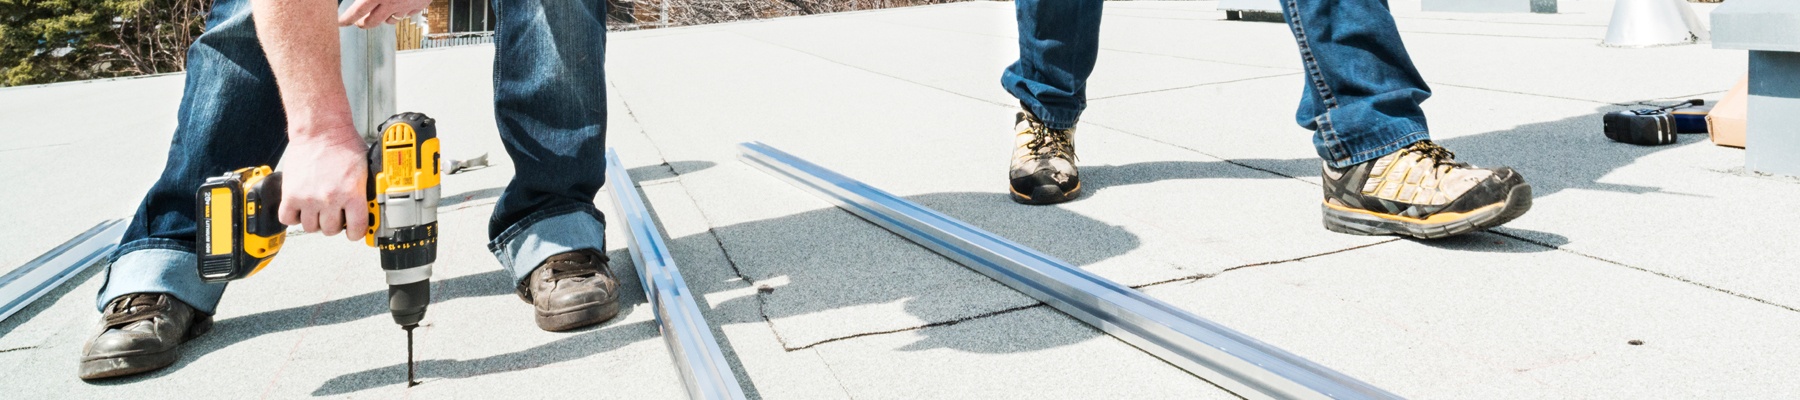 Most commercial buildings have flat and low-slope roofing systems to minimize energy costs and maximize space for HVAC units. The installation of these roofing systems can be complicated and require specialized contractors.